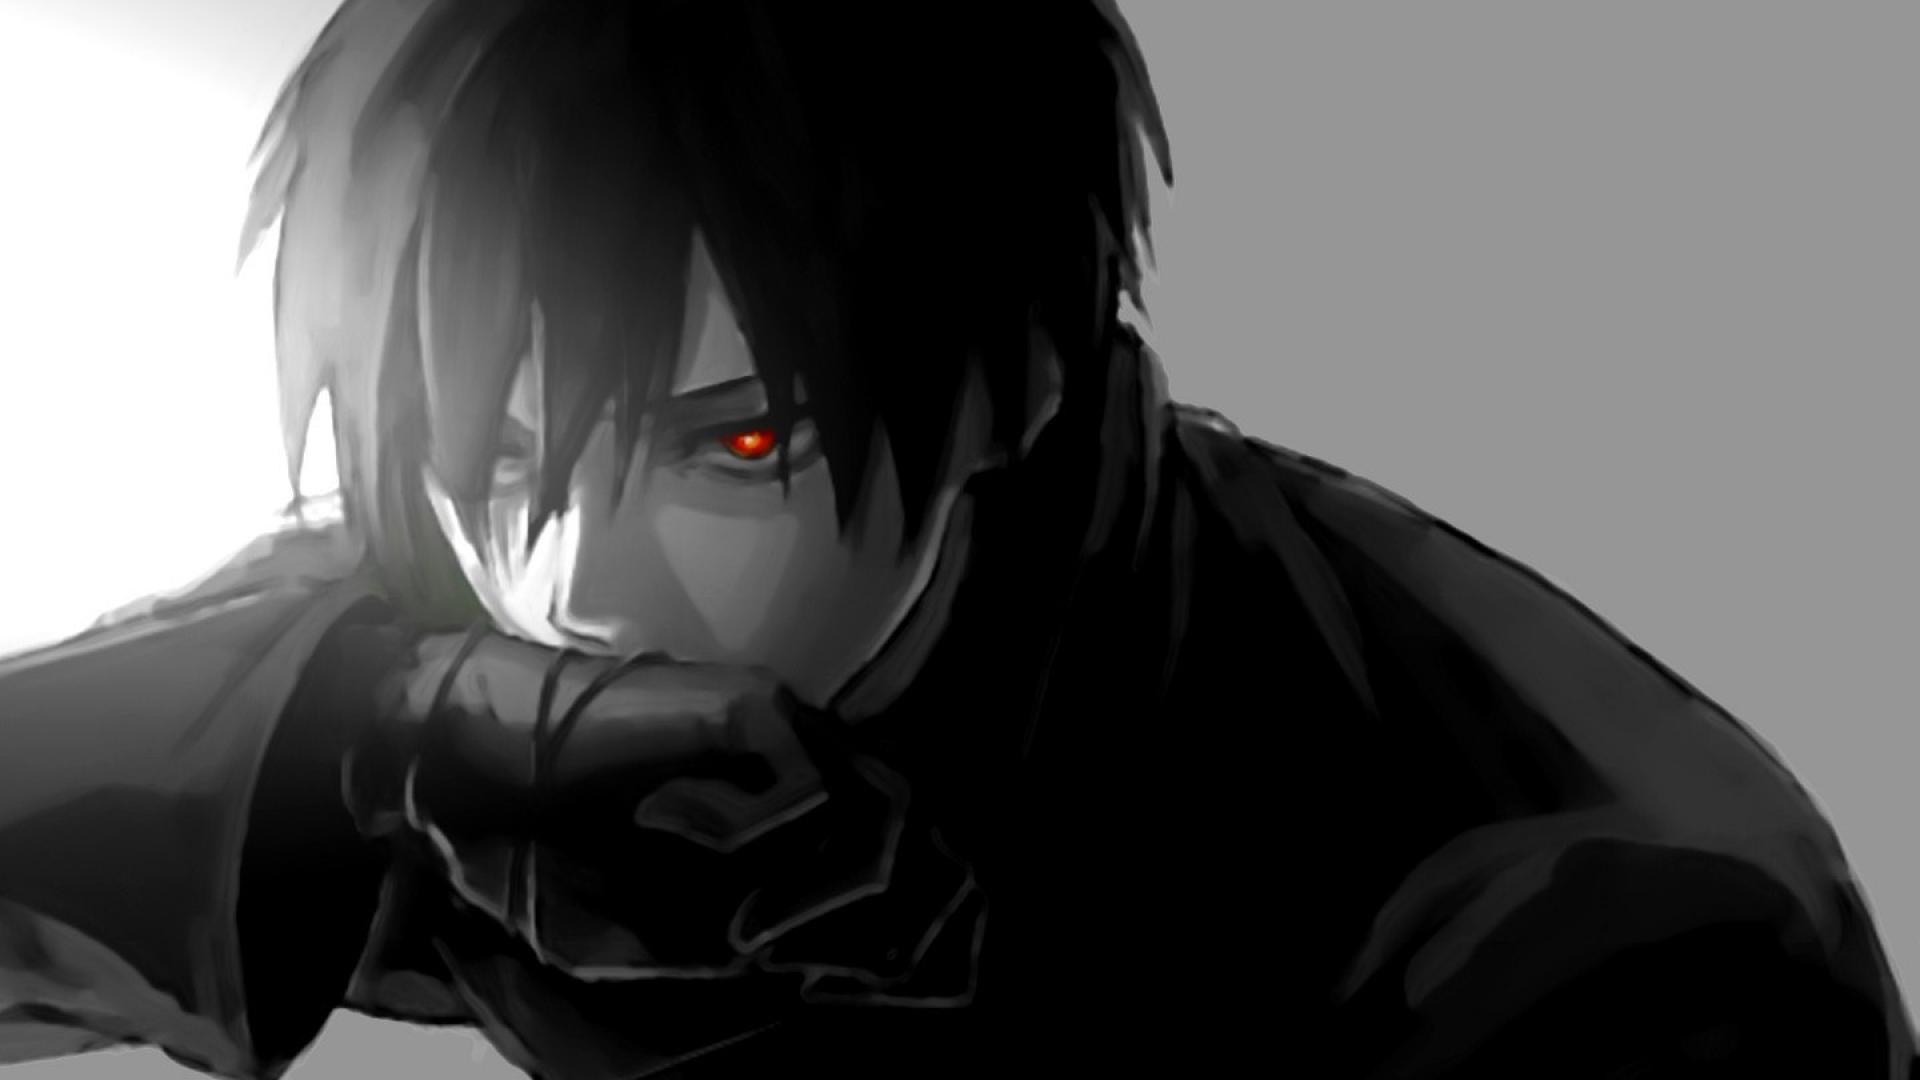 Amazing Darker Than Black Pictures & Backgrounds